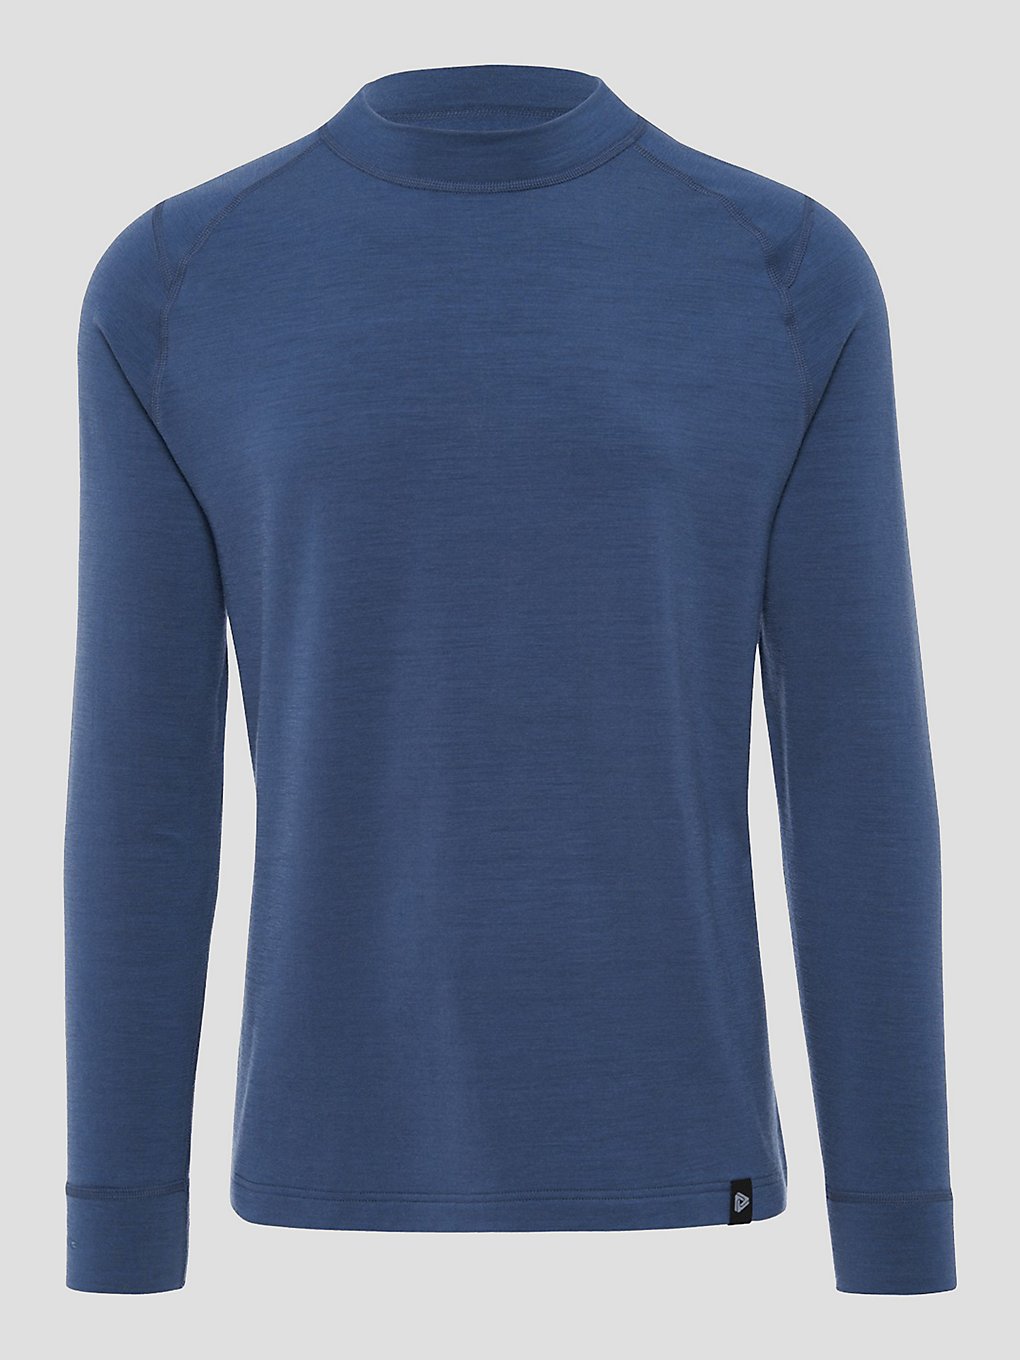 Thermowave Funktionsshirt gray blue kaufen